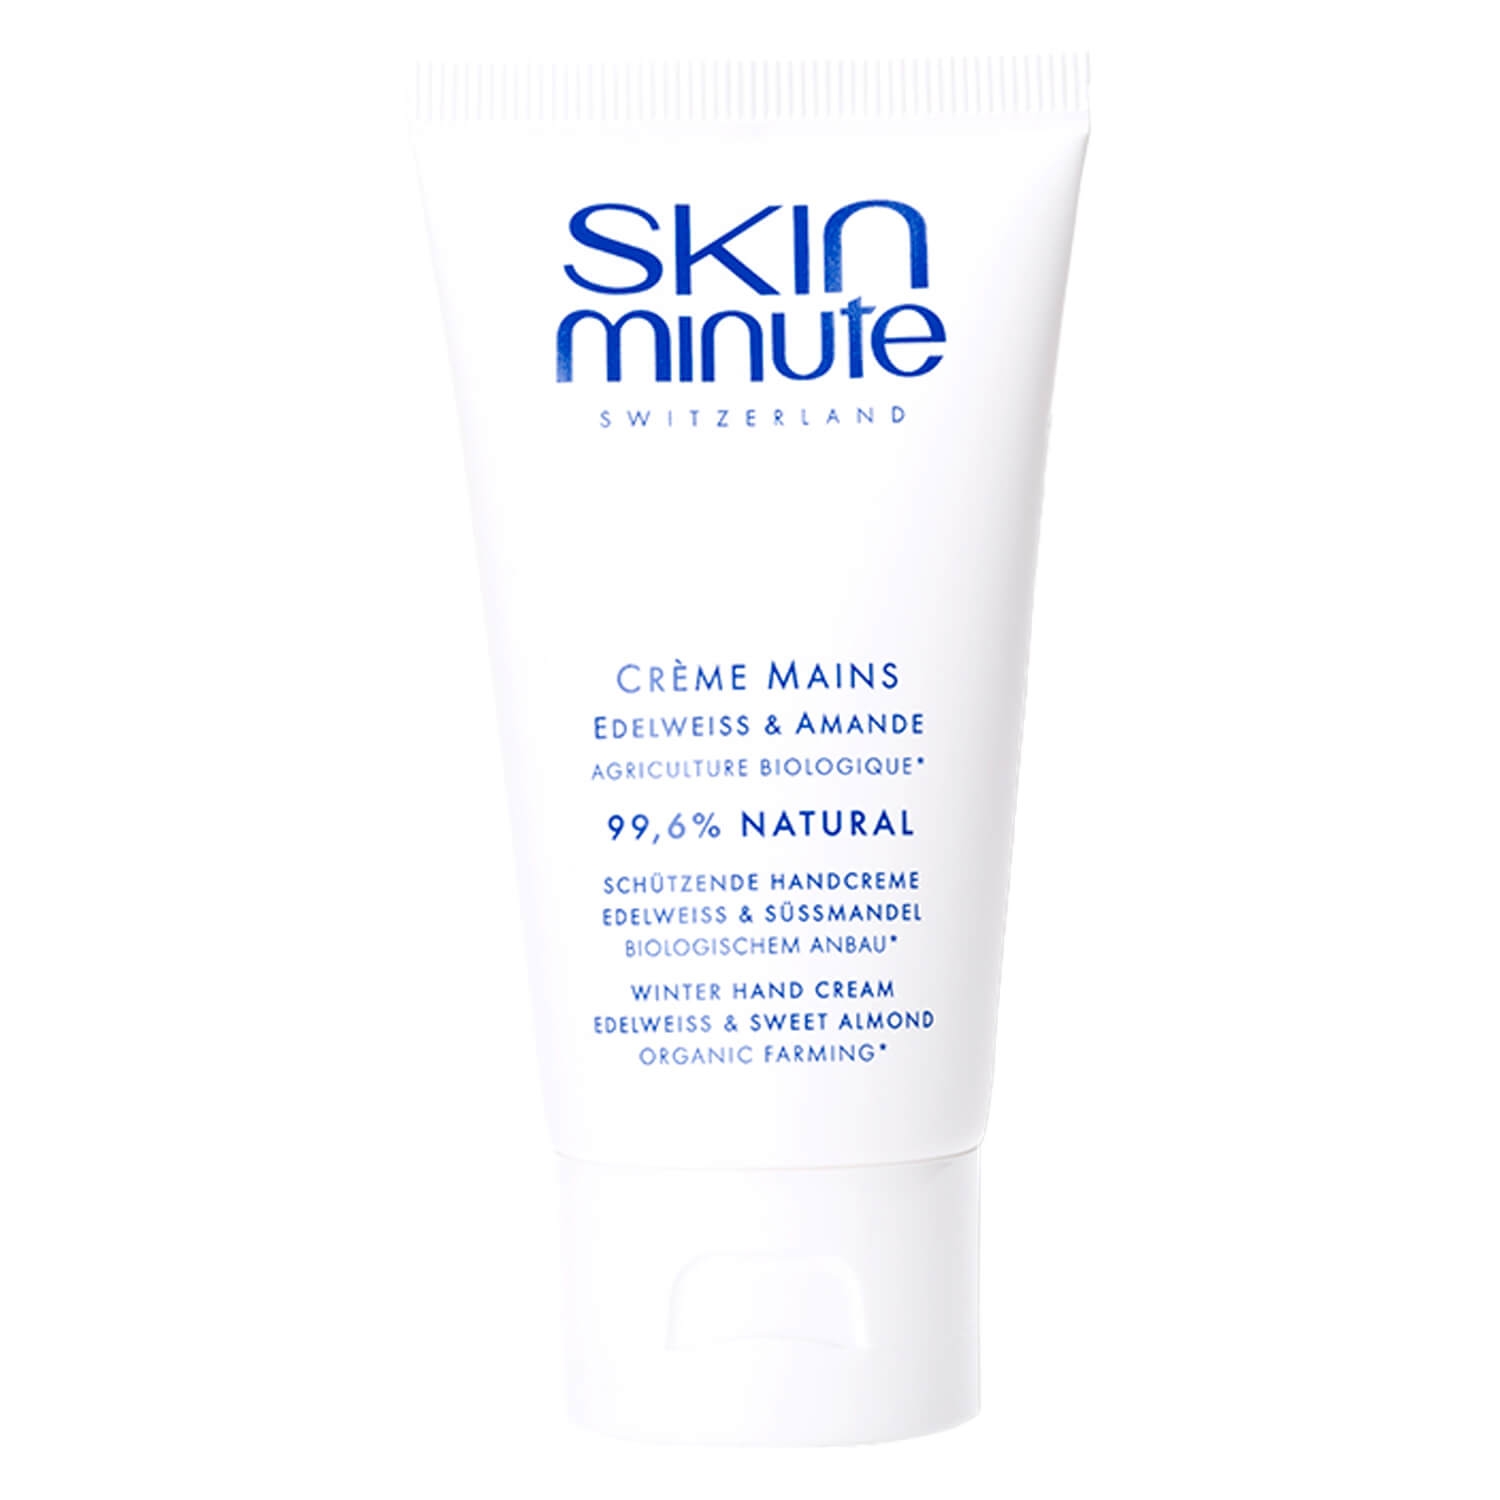 Product image from skinminute - Handcreme Edelweiss & Süssmandel